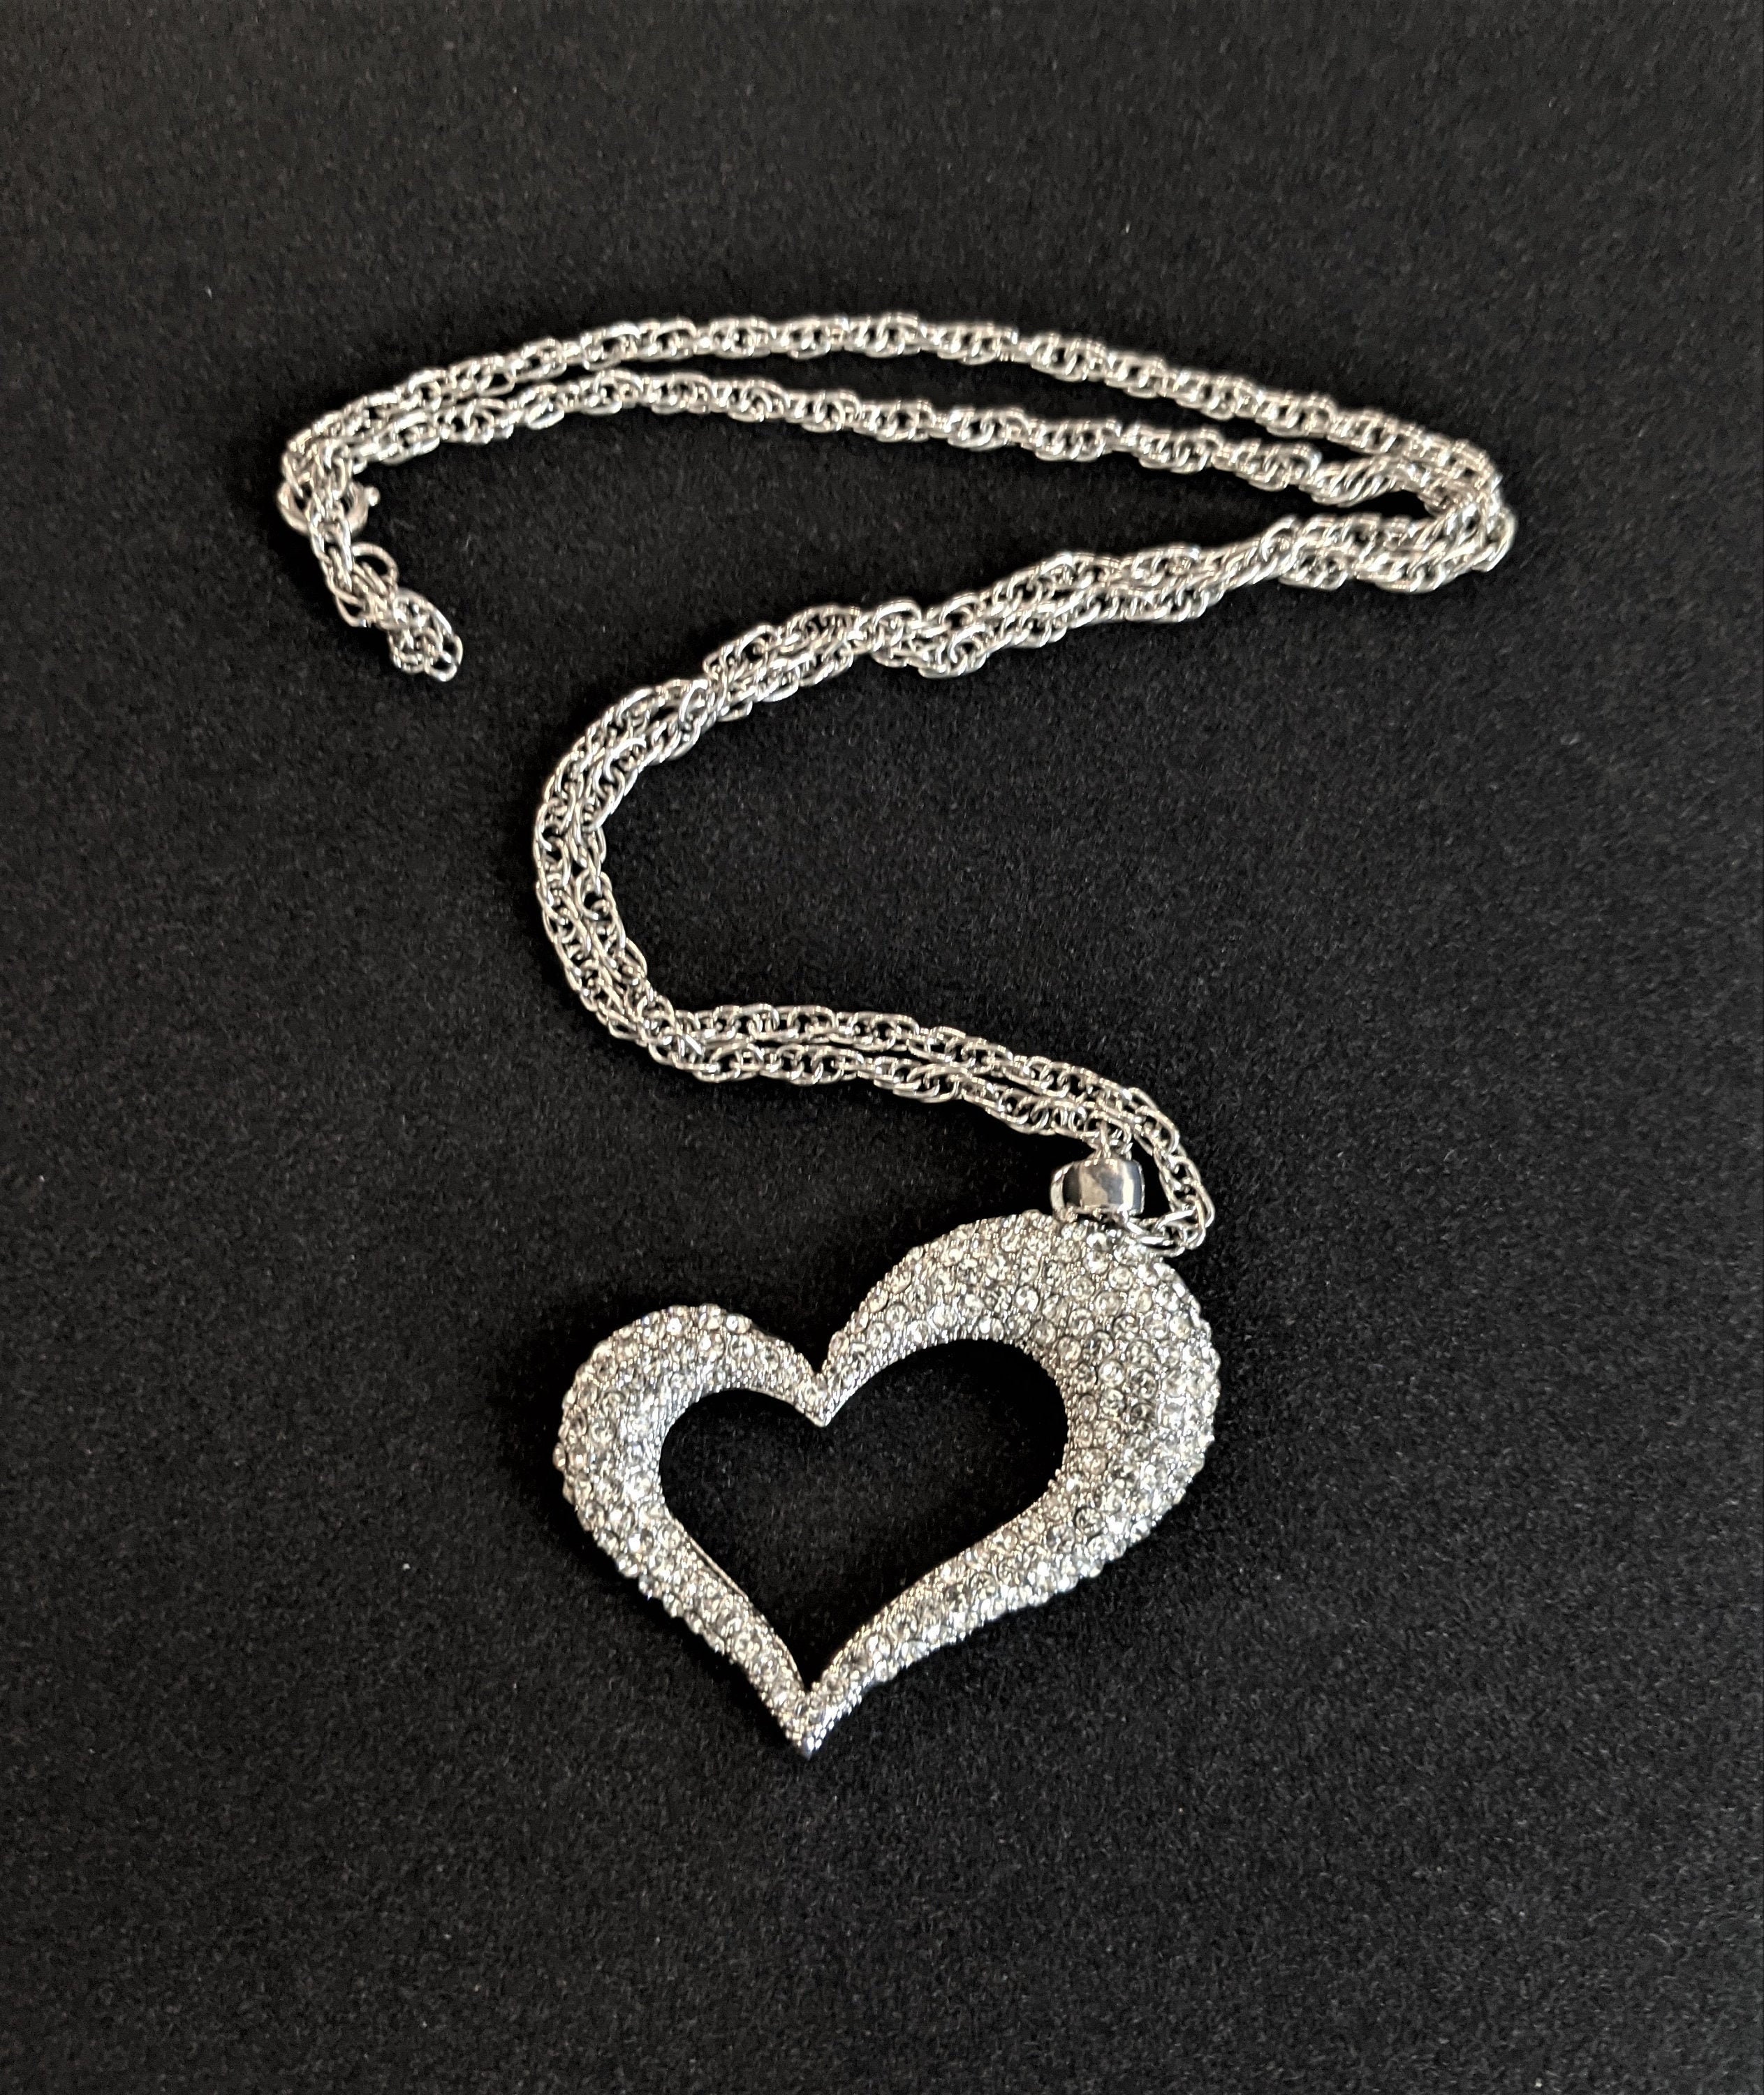 Yuehao Necklaces & Pendants Rhinestone Choker Necklace Diamond Heart Necklaces 2 Rows Chain Jewelry for Women Girls, Adult Unisex, Size: 12.3, Silver